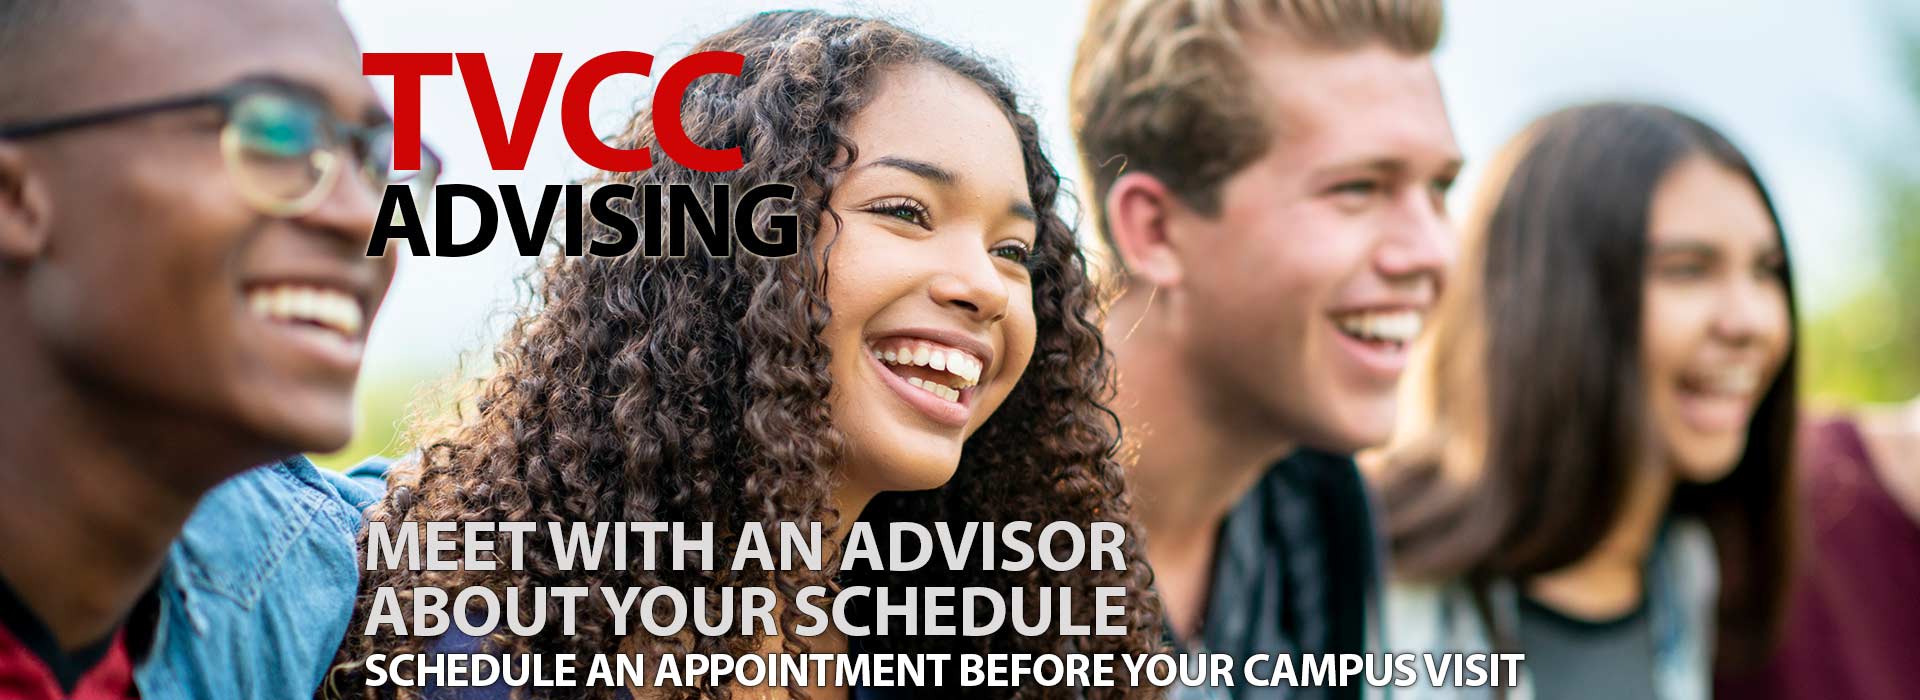 Meet with an advisor about your schedule. Schedule an appointment before your campus visit!